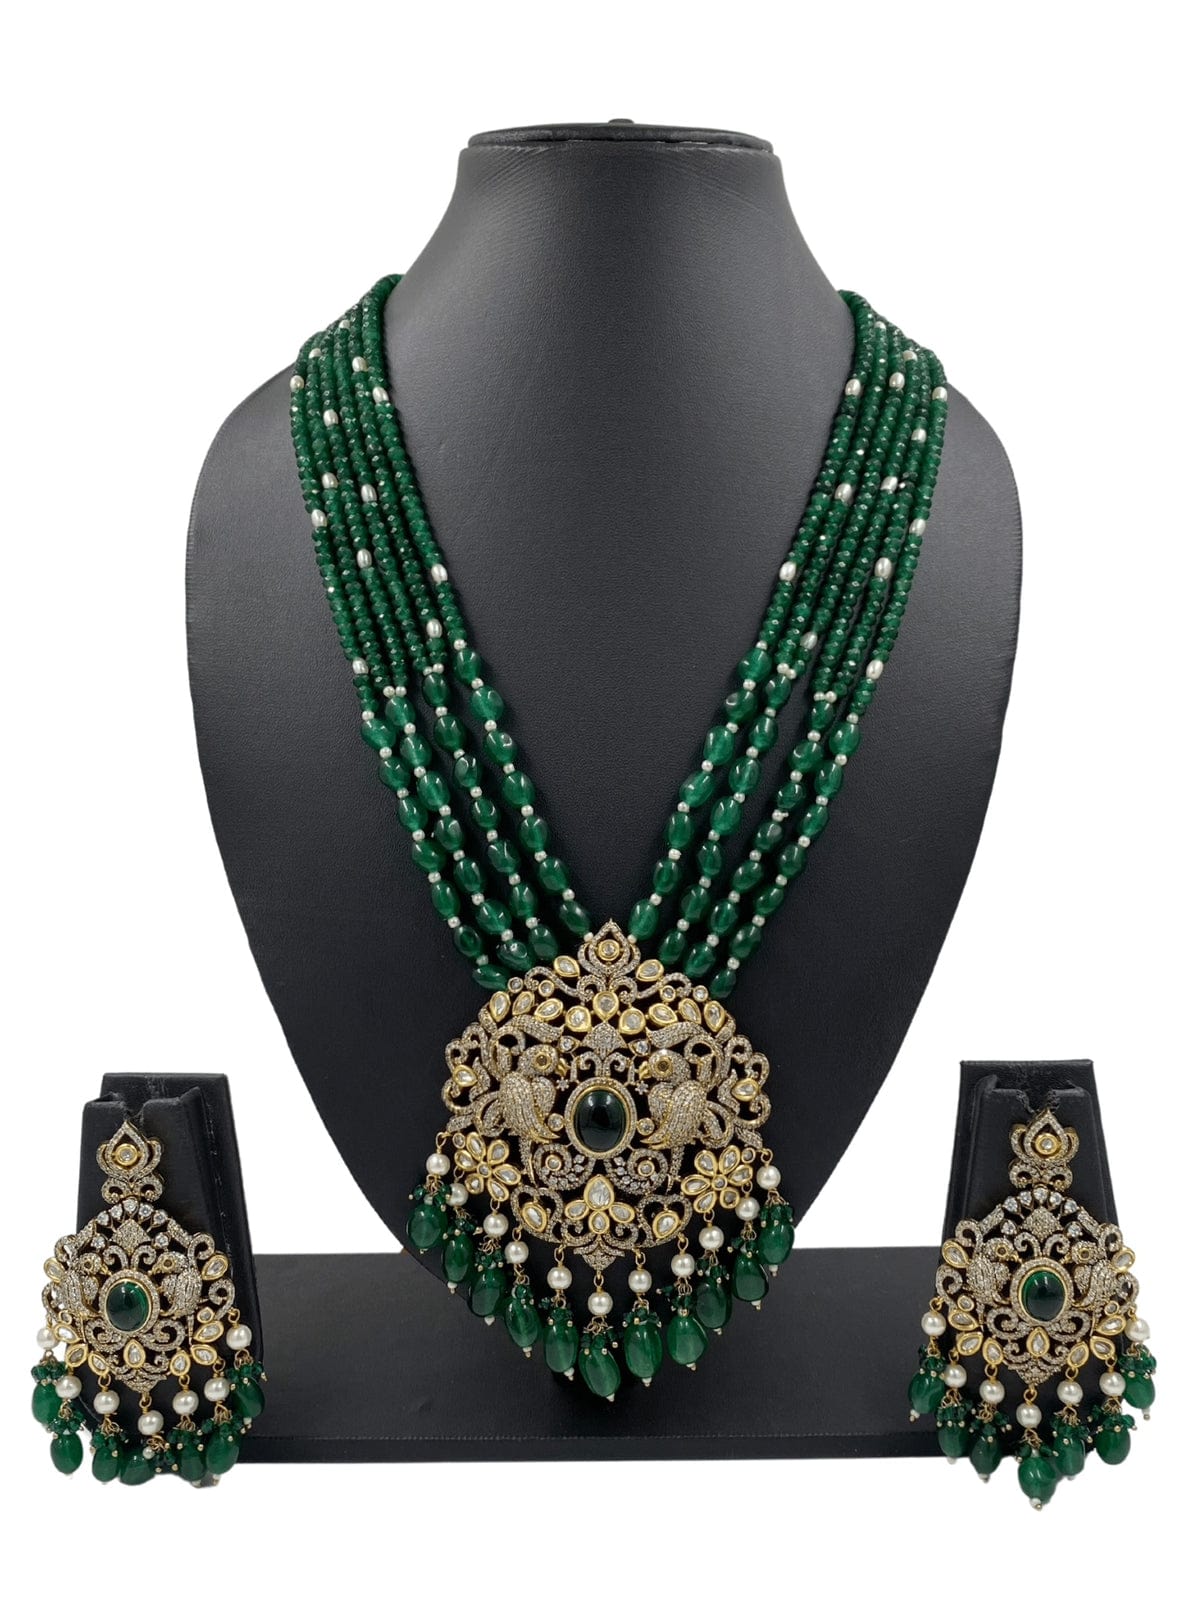 Designer Antique Victorian AD And Polki Pendant Necklace Set For Weddings Victorian Necklace Sets